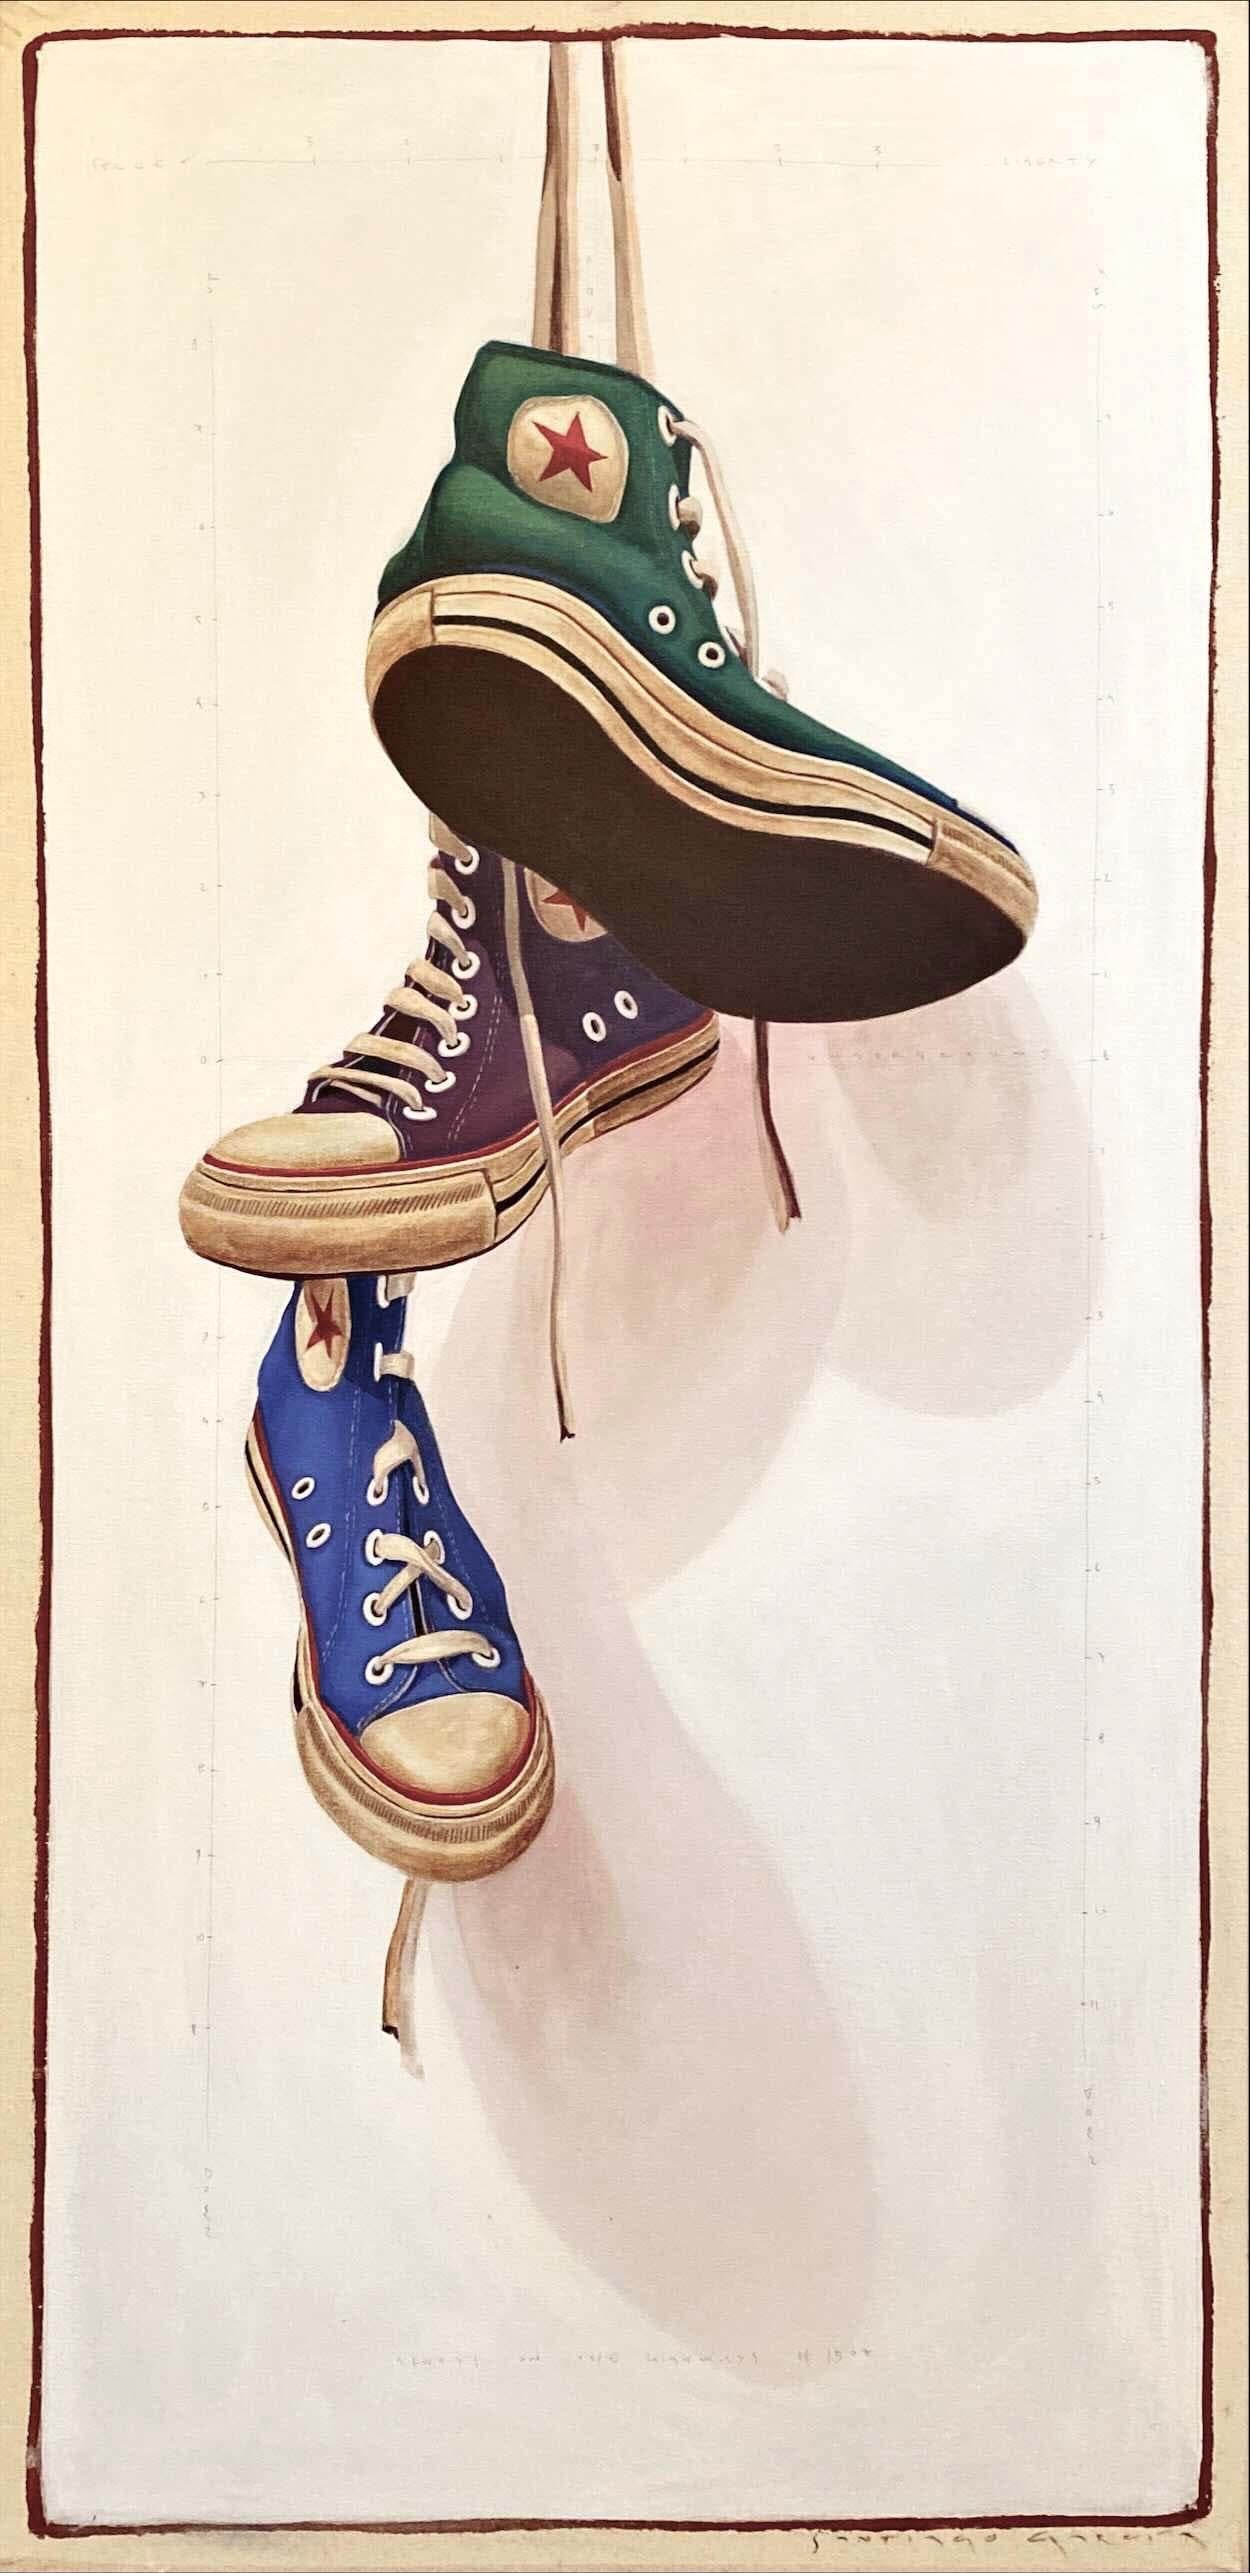 Santiago Garcia Still-Life Painting - "#1507" photorealistic oil painting of green, purple, and blue converse sneakers